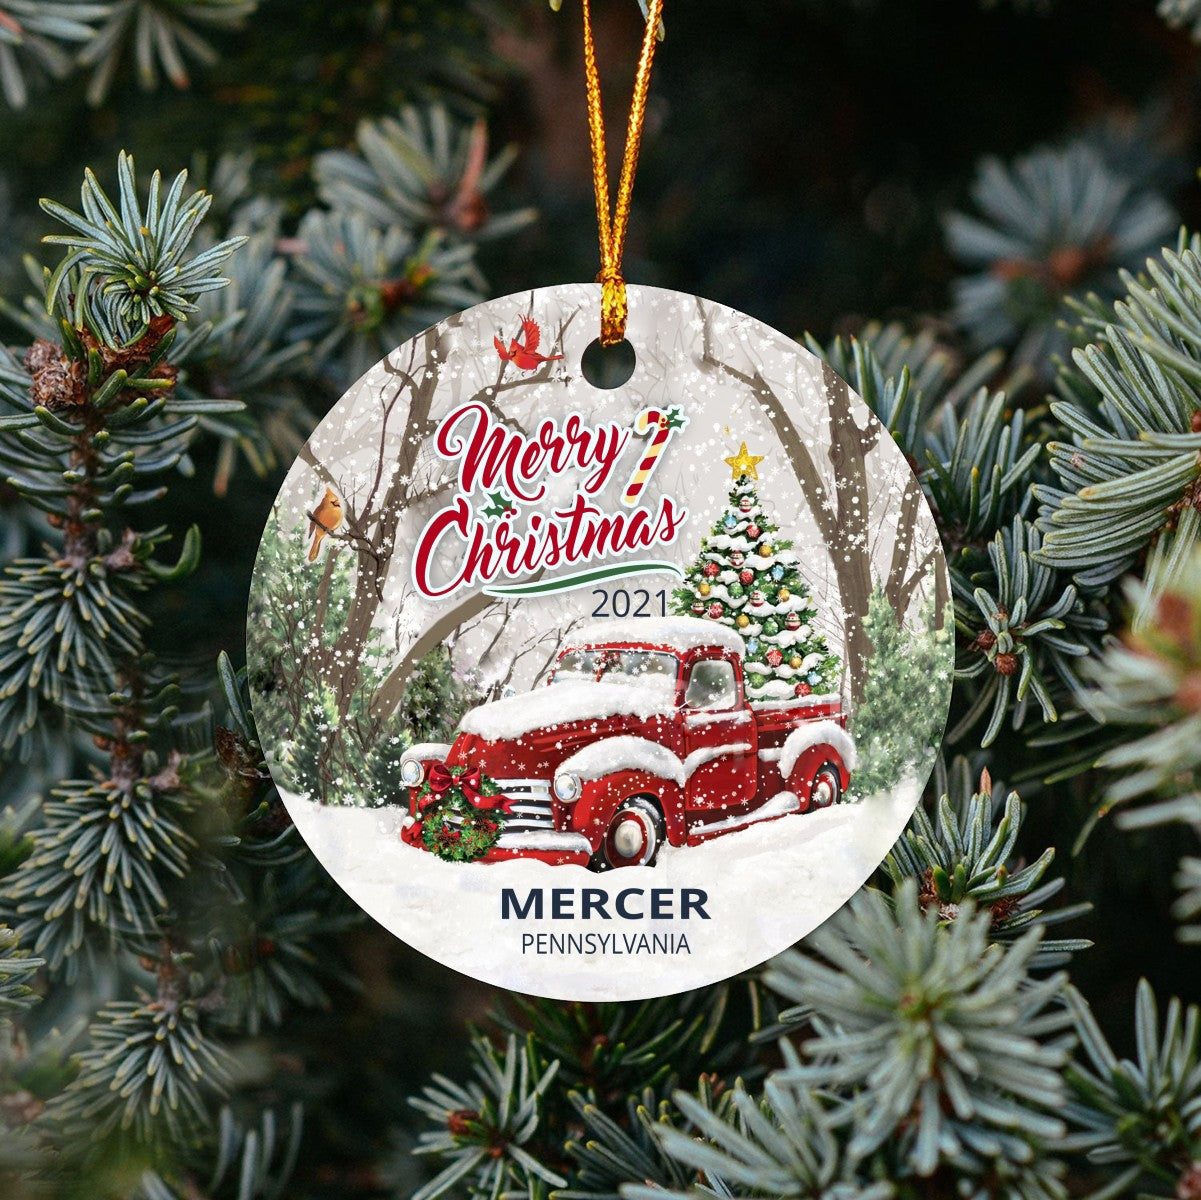 Christmas Tree Ornaments Mercer - Ornament With Name City, State Mercer Pennsylvania PA Ornament - Red Truck Xmas Ornaments 3'' Plastic Gift For Family, Friend And Housewarming